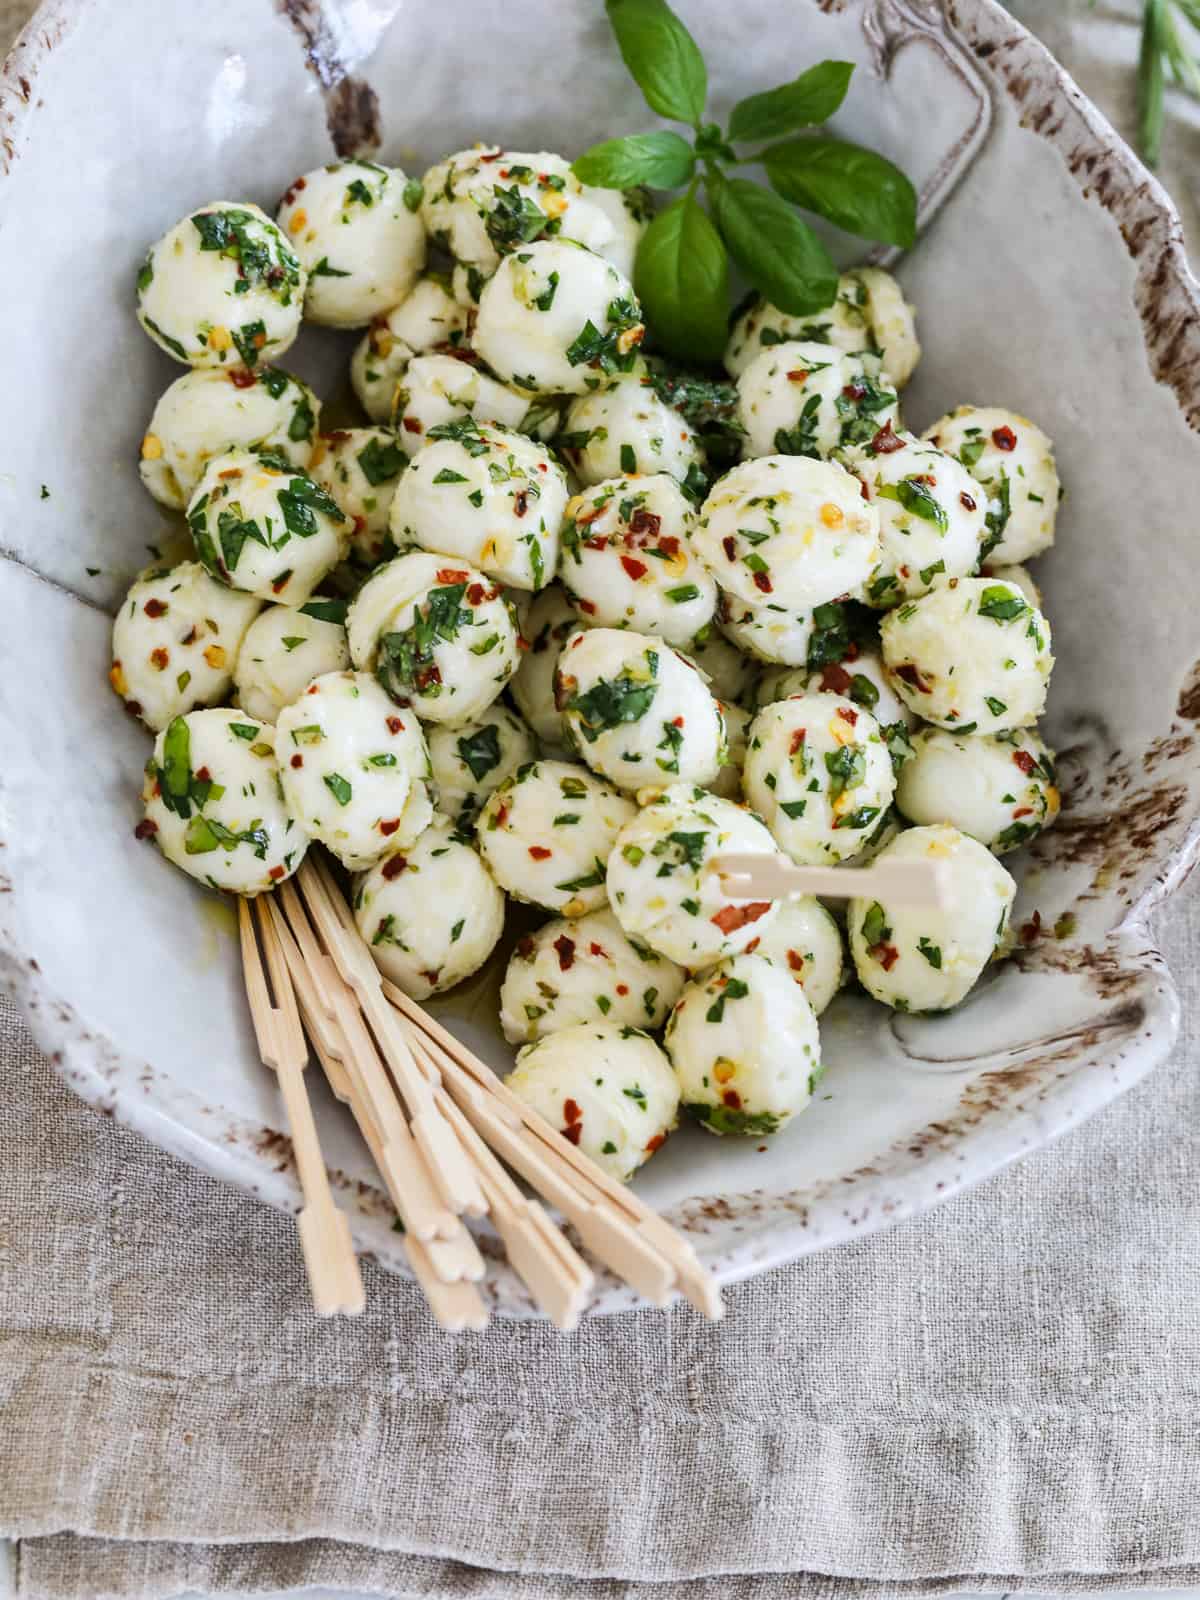 horderves ideas, eight cheese balls, with different toppings